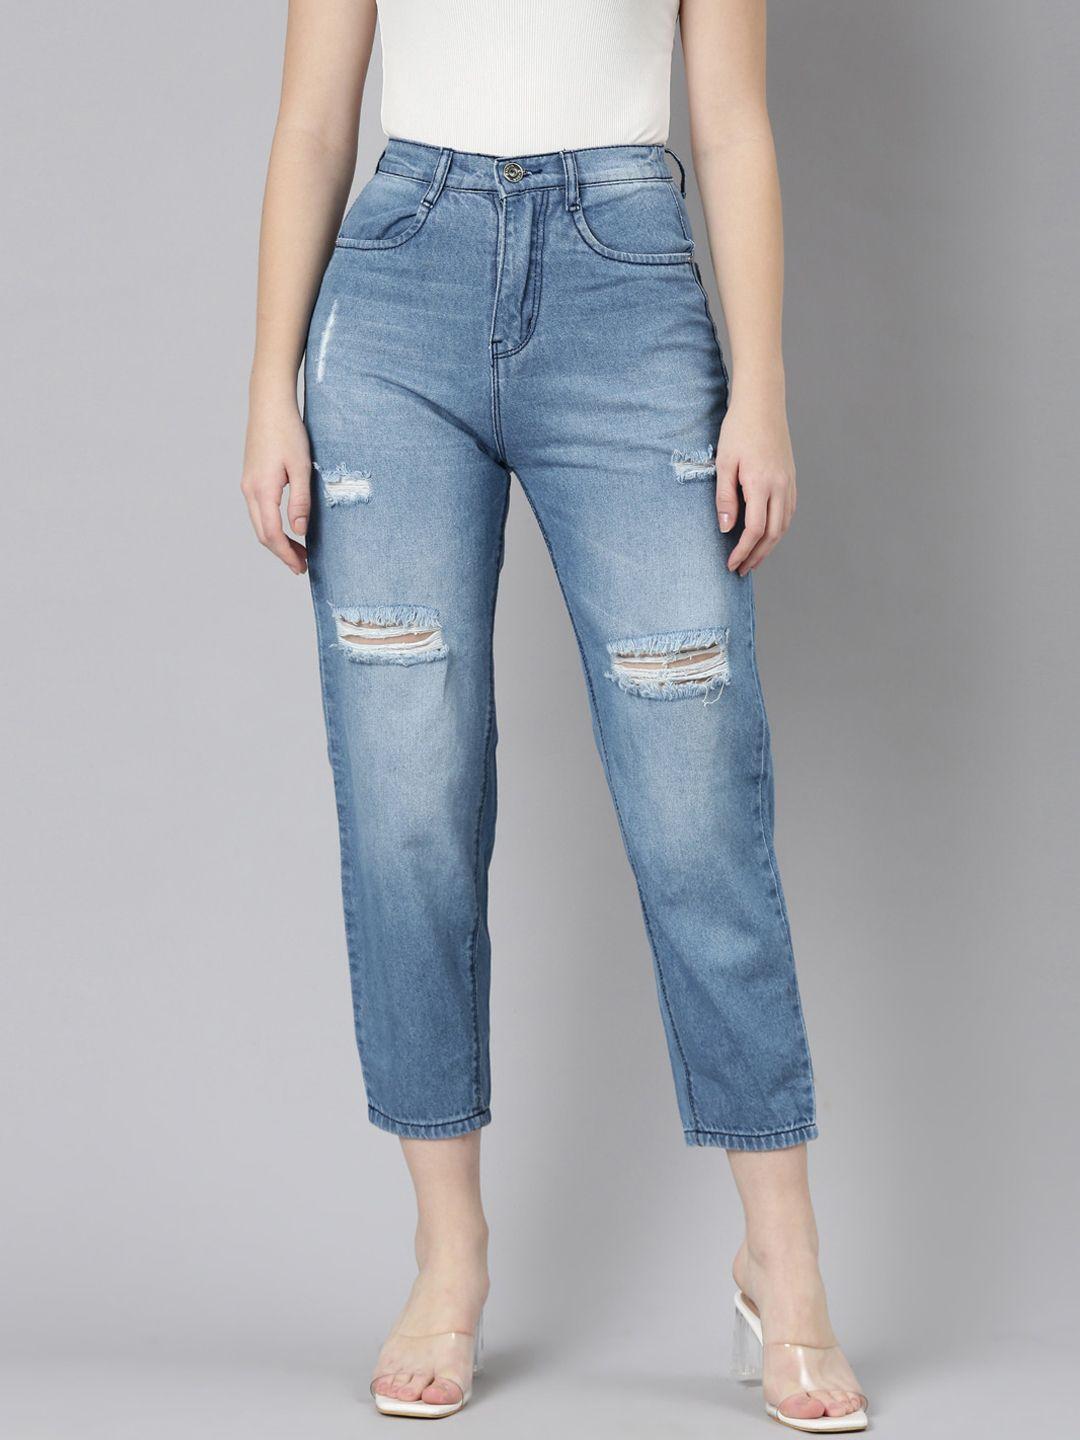 ZHEIA Mid Rise Relaxed Fit Mildly Distressed Light Fade Cotton Jeans